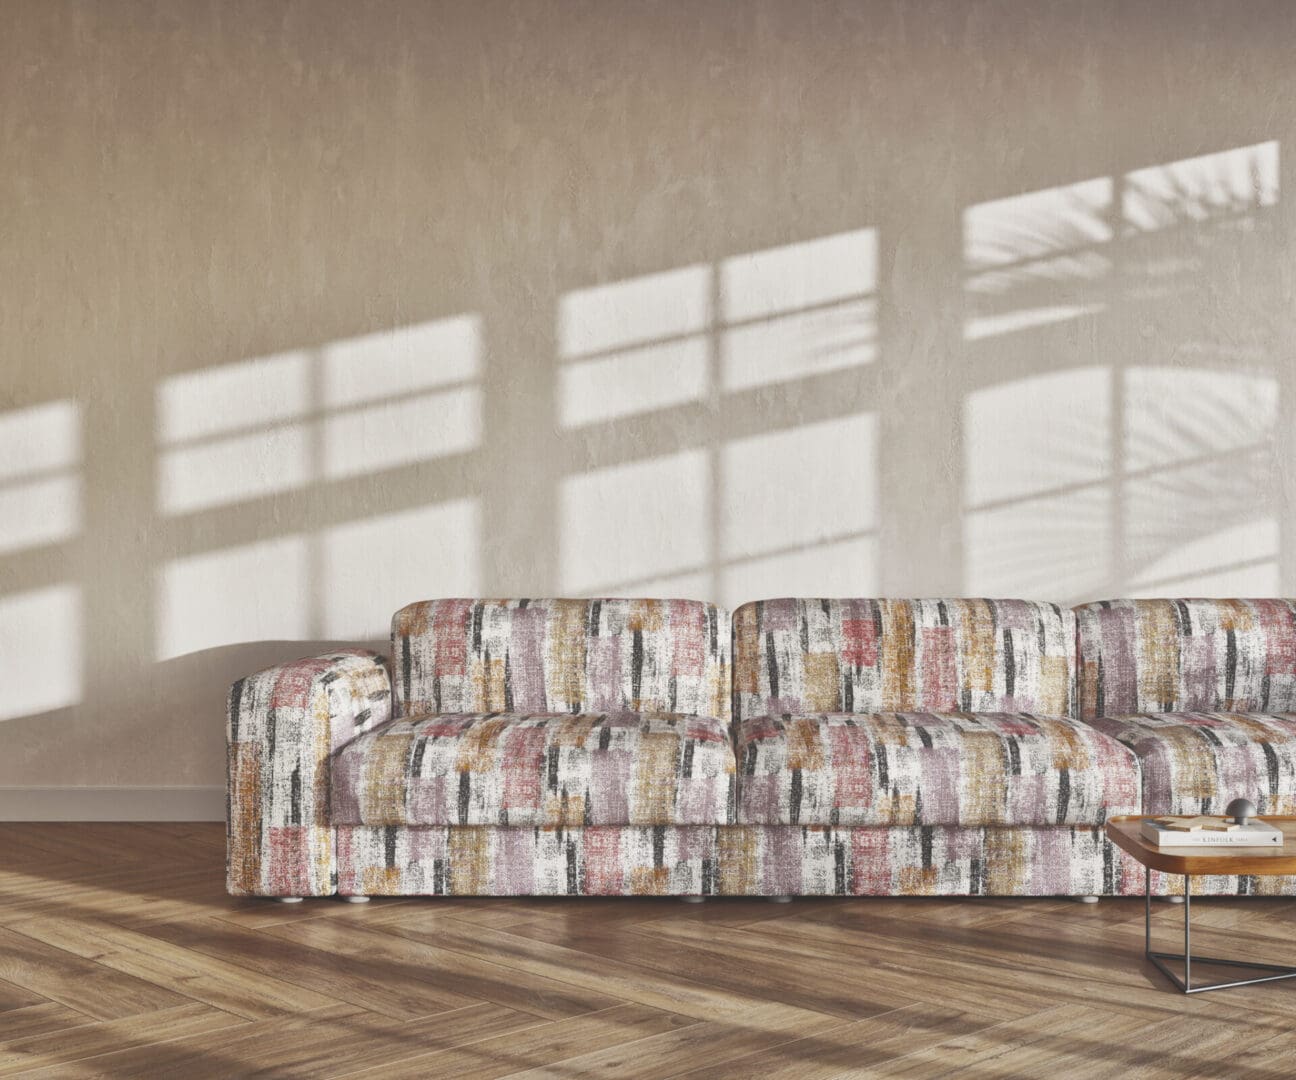 A couch in front of some windows with blinds on them